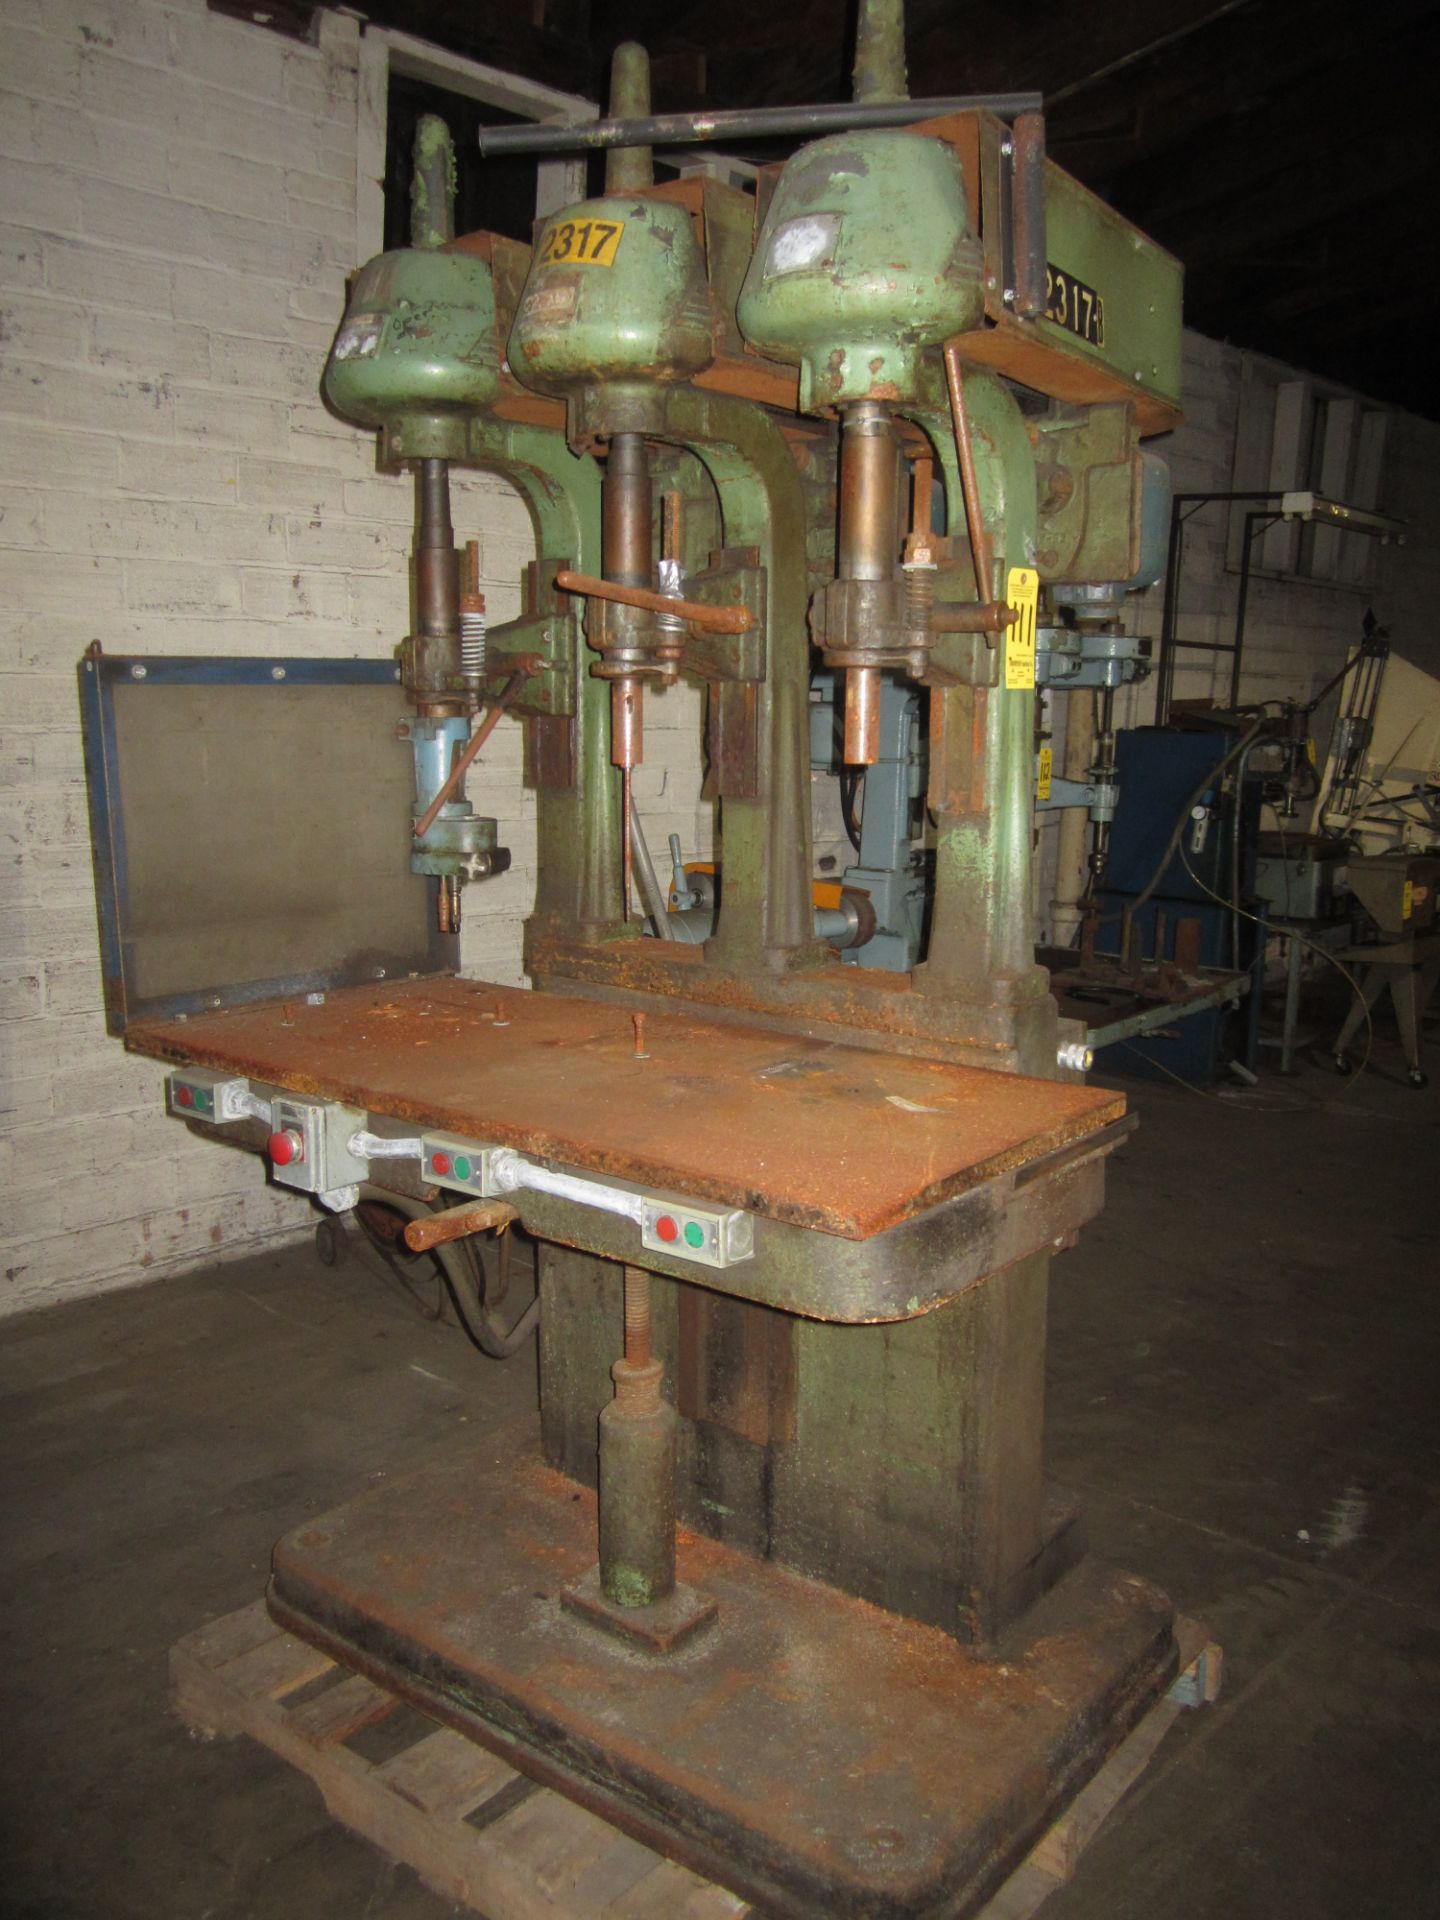 3-Spindle Drill Press with Production Table, Loading Fee $100.00